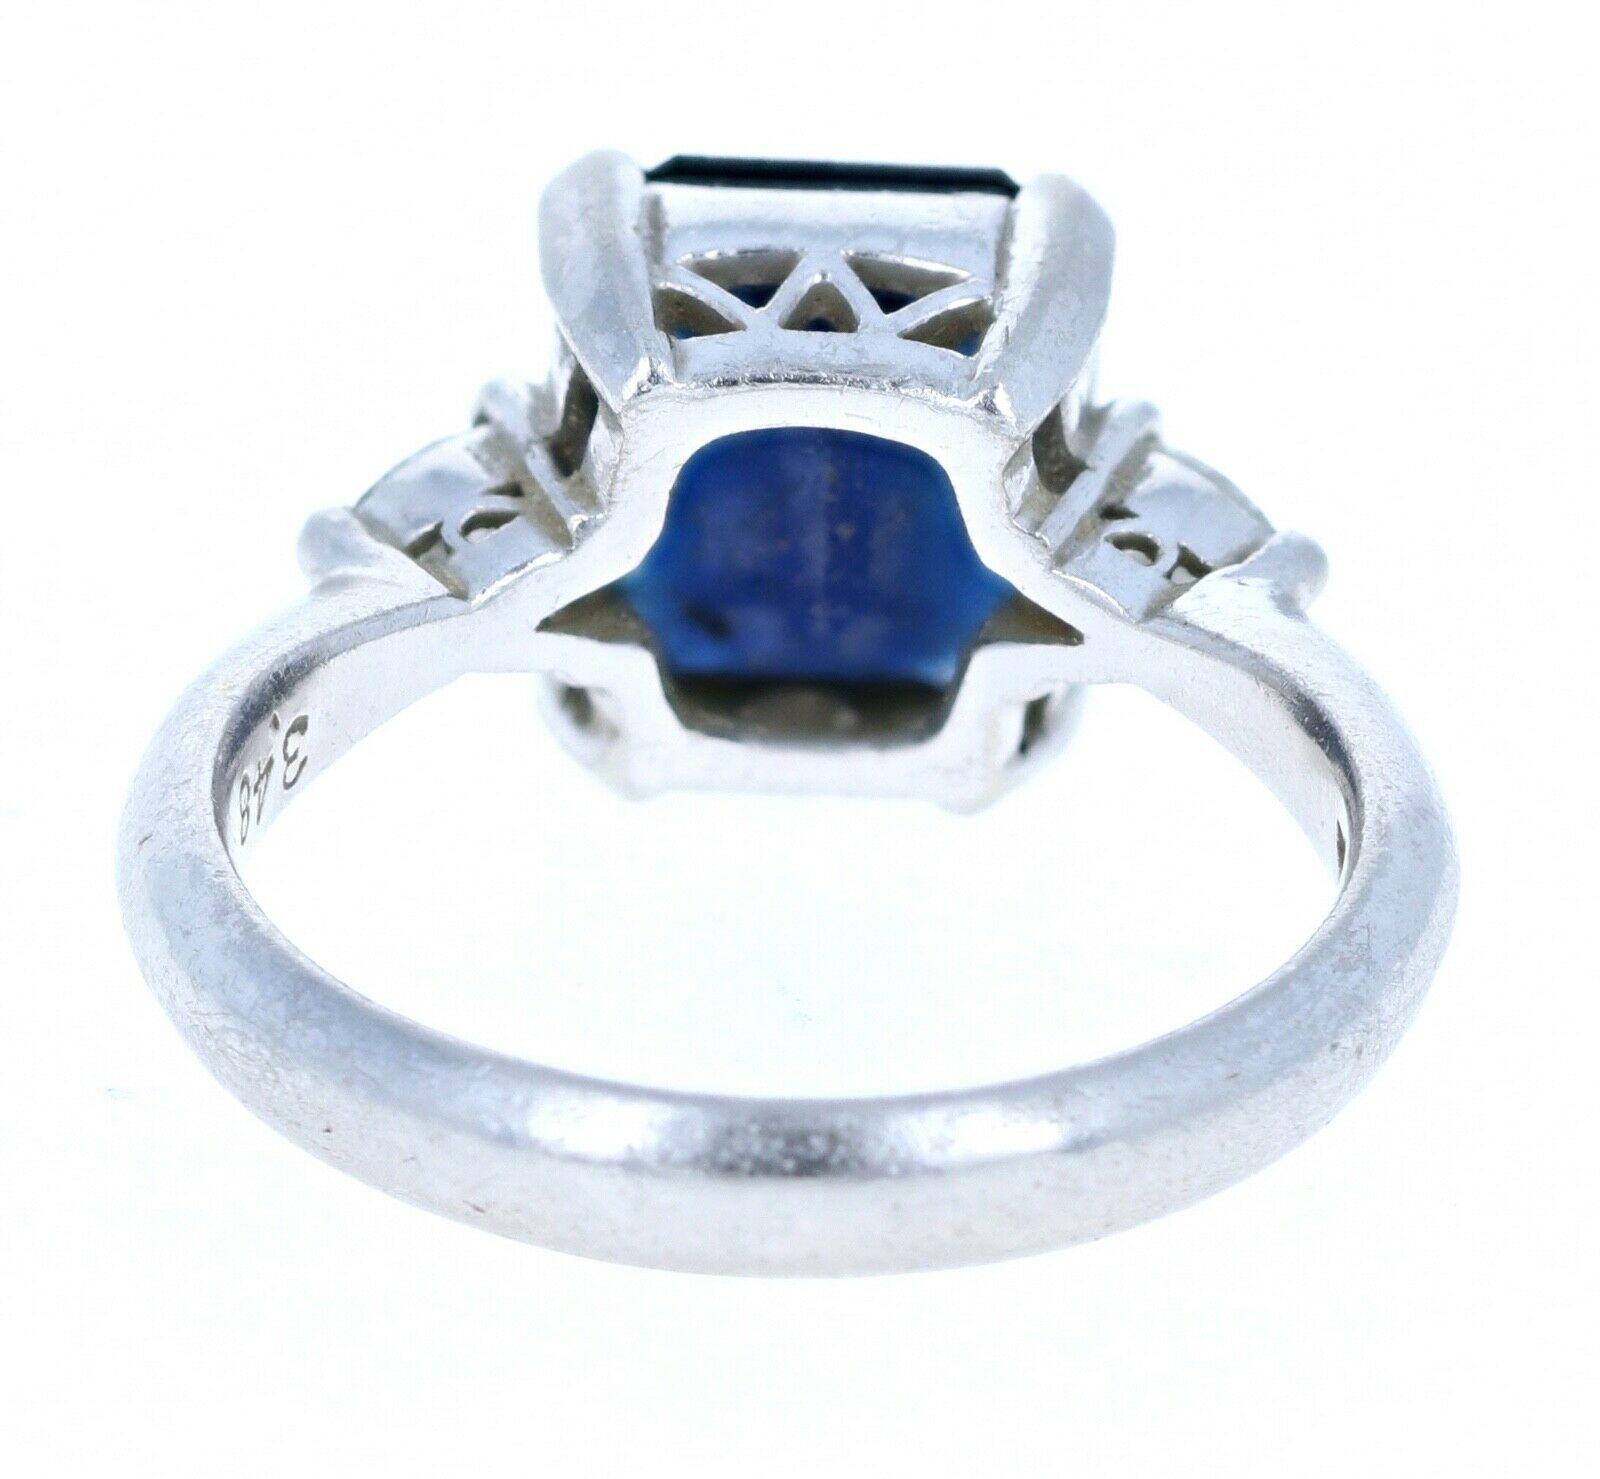  Beautiful sapphire & diamond ring 

Very elegant for everyday wear !! 

Approx 0.24 ctw of G-H, VS diamonds 

Sapphire approx ct 3.48



Size 6.25

Weight 7 grams

